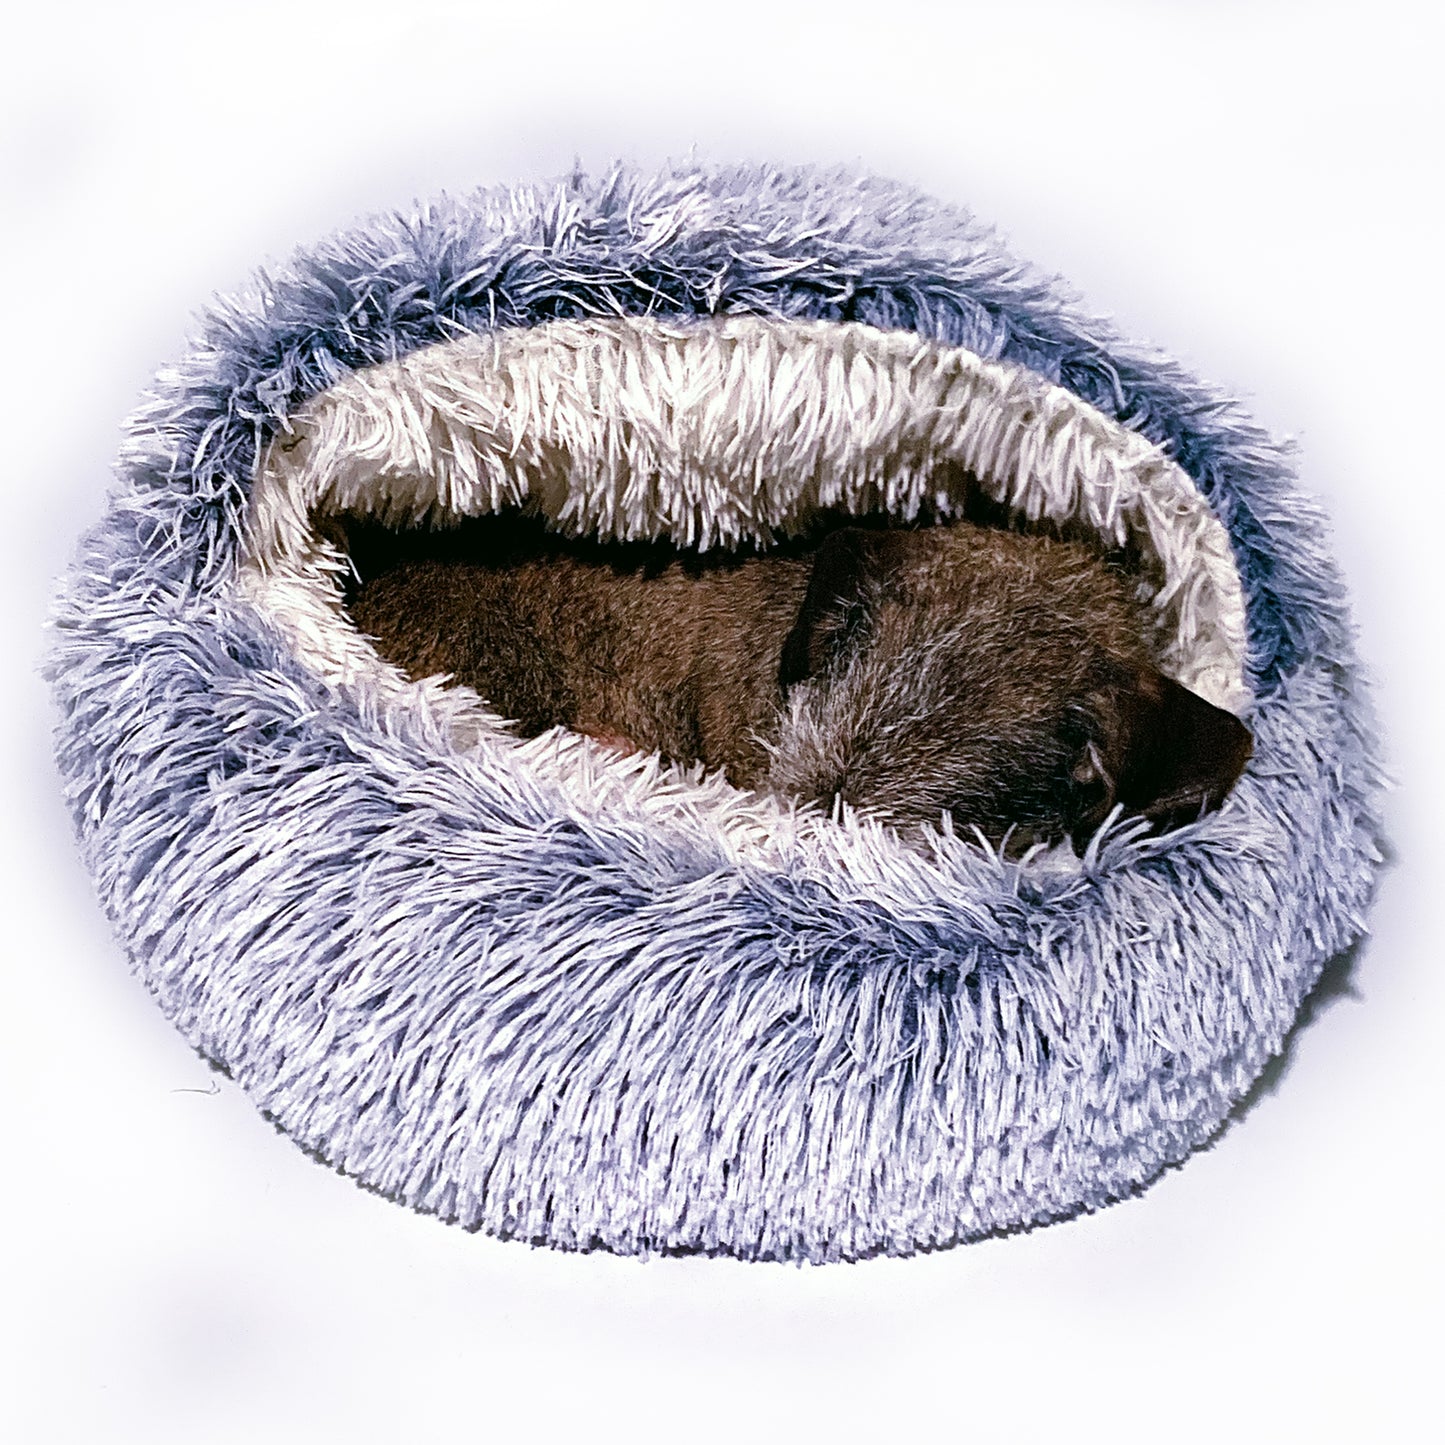 Snuggle Dog Bed - For Small Dogs and Puppies